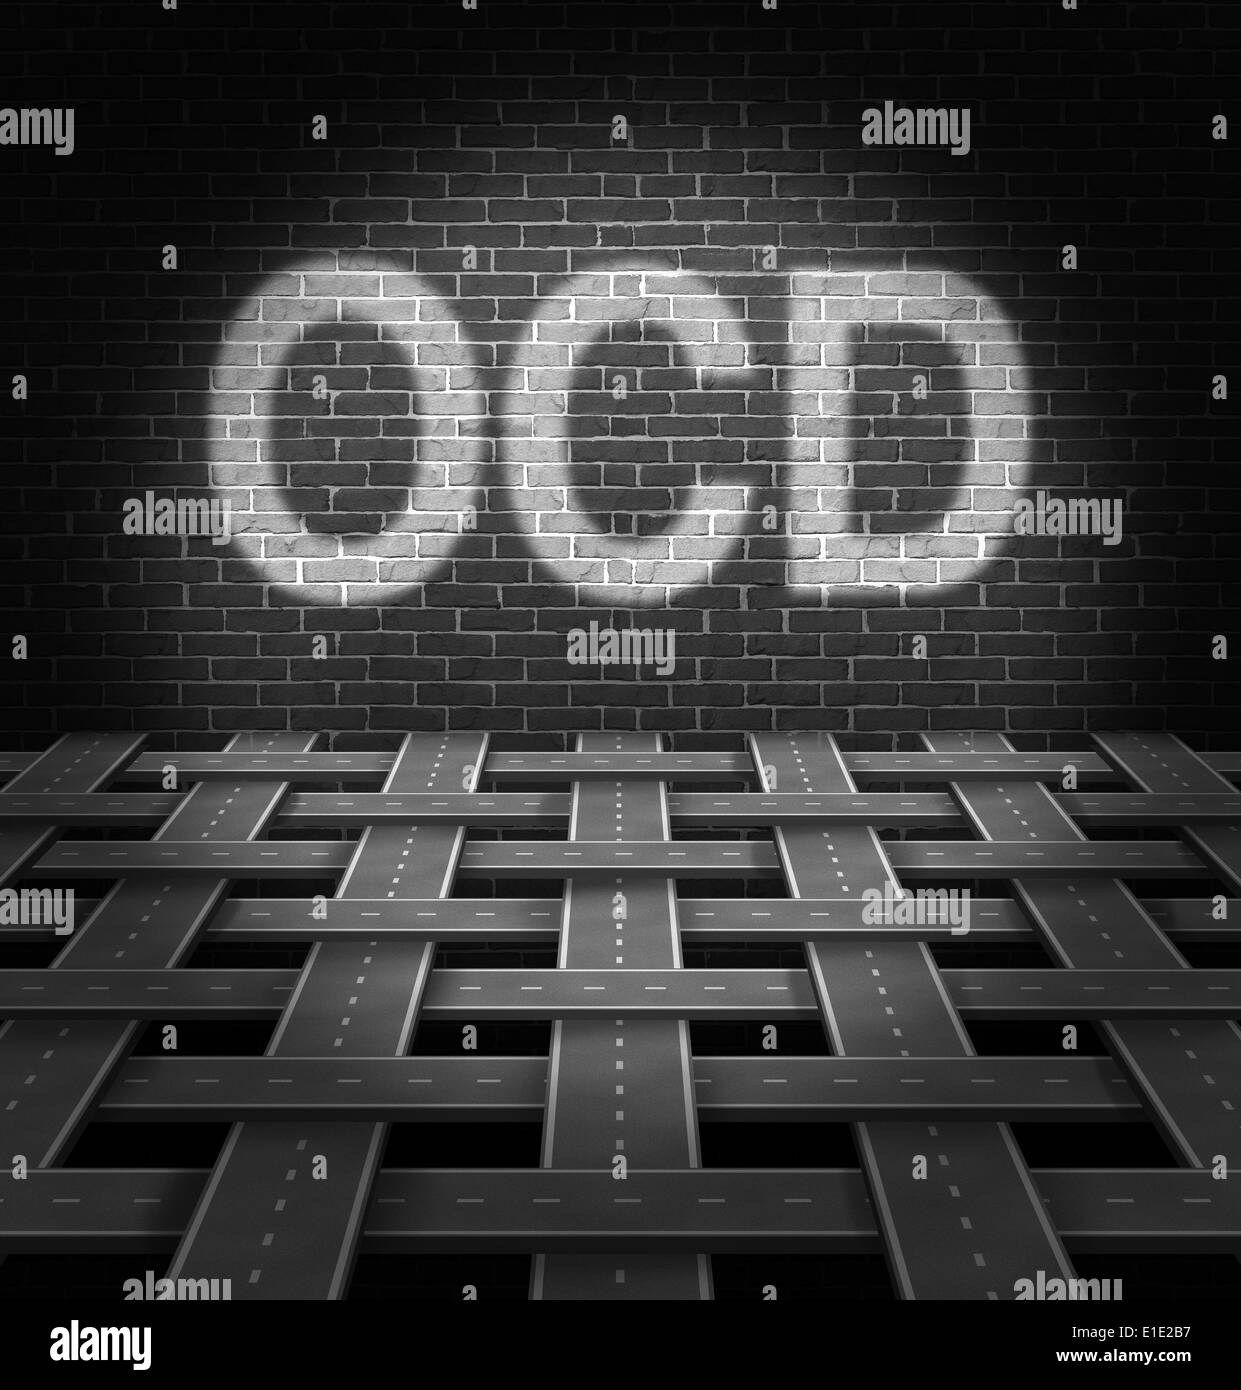 OCD concept and obsessive compulsive disorder medical symbol as a group of roads organized in a pattern hitting a brick wall with the text in light as an icon of anxiety symptoms and repetitive psychological behavior issues. Stock Photo